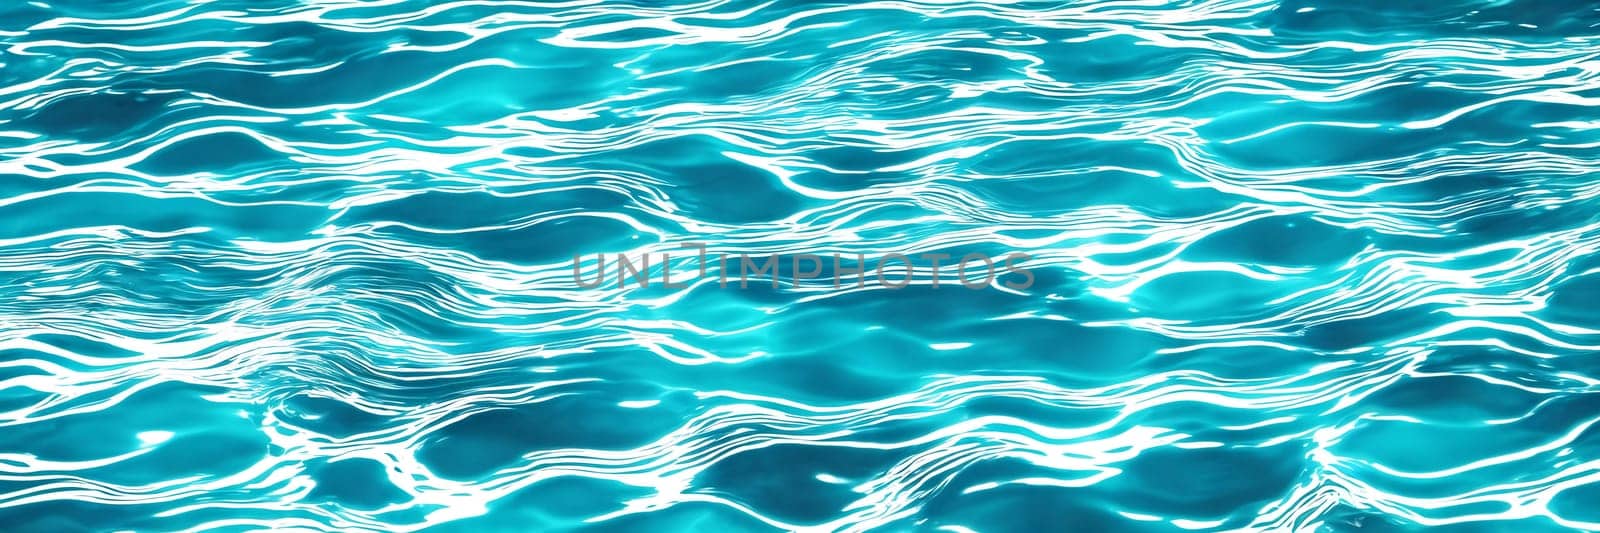 Abstract Water Ripples. Water surfaces with gentle ripples. These backgrounds work well for websites, presentations, and branding.